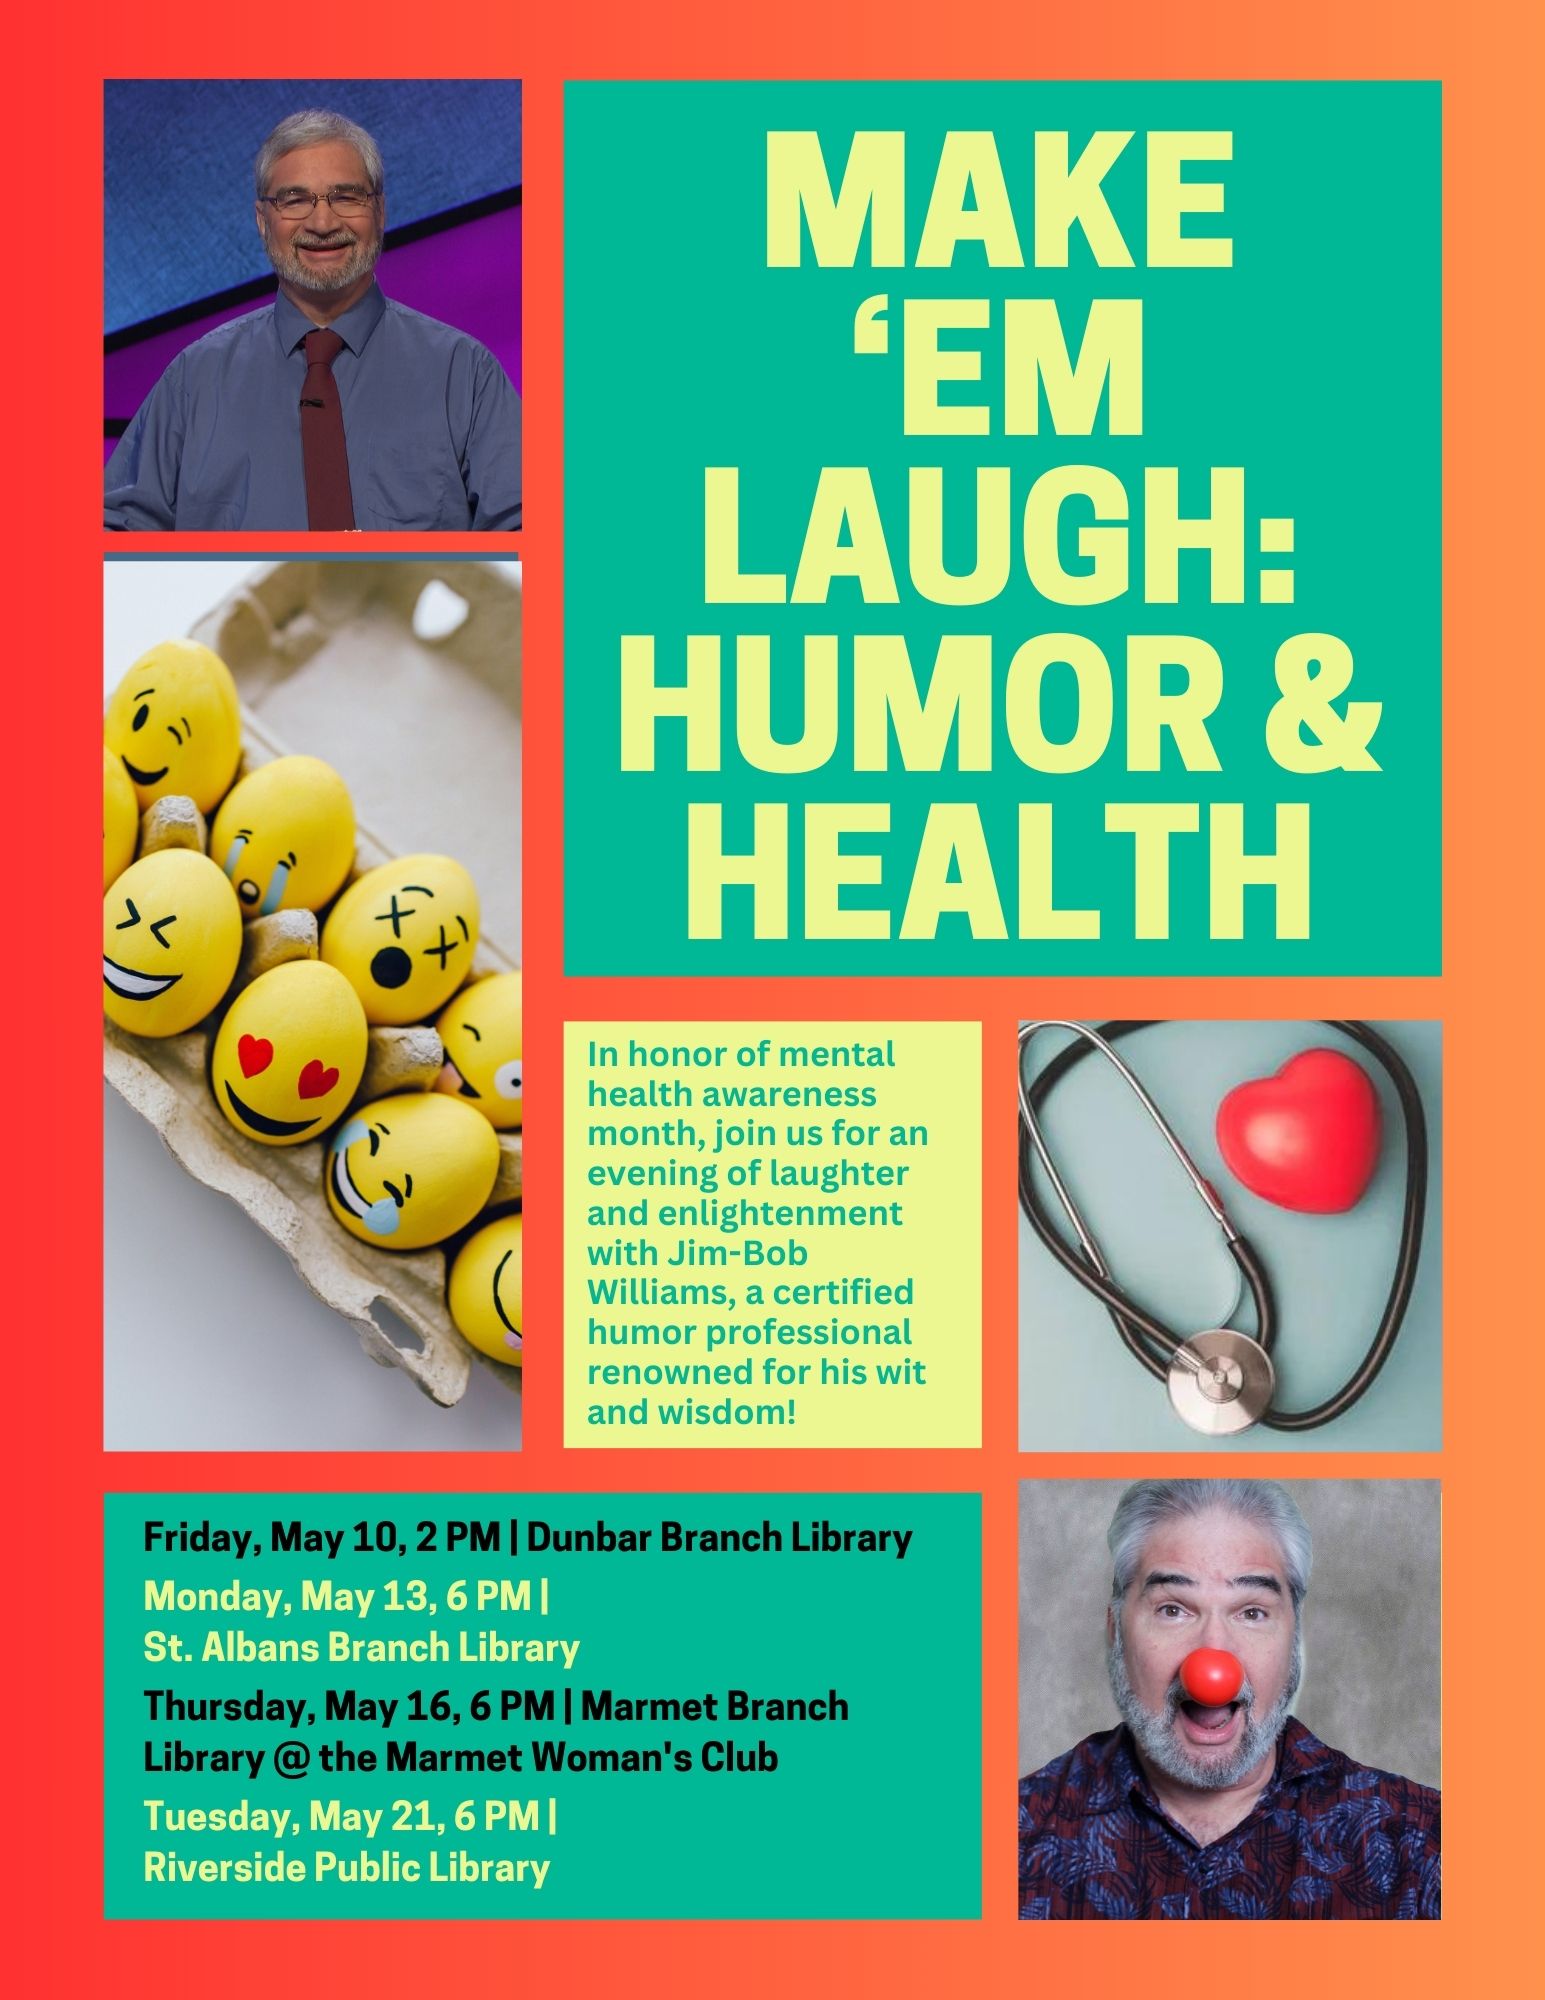 A flyer with information about our event series on Humor and Health